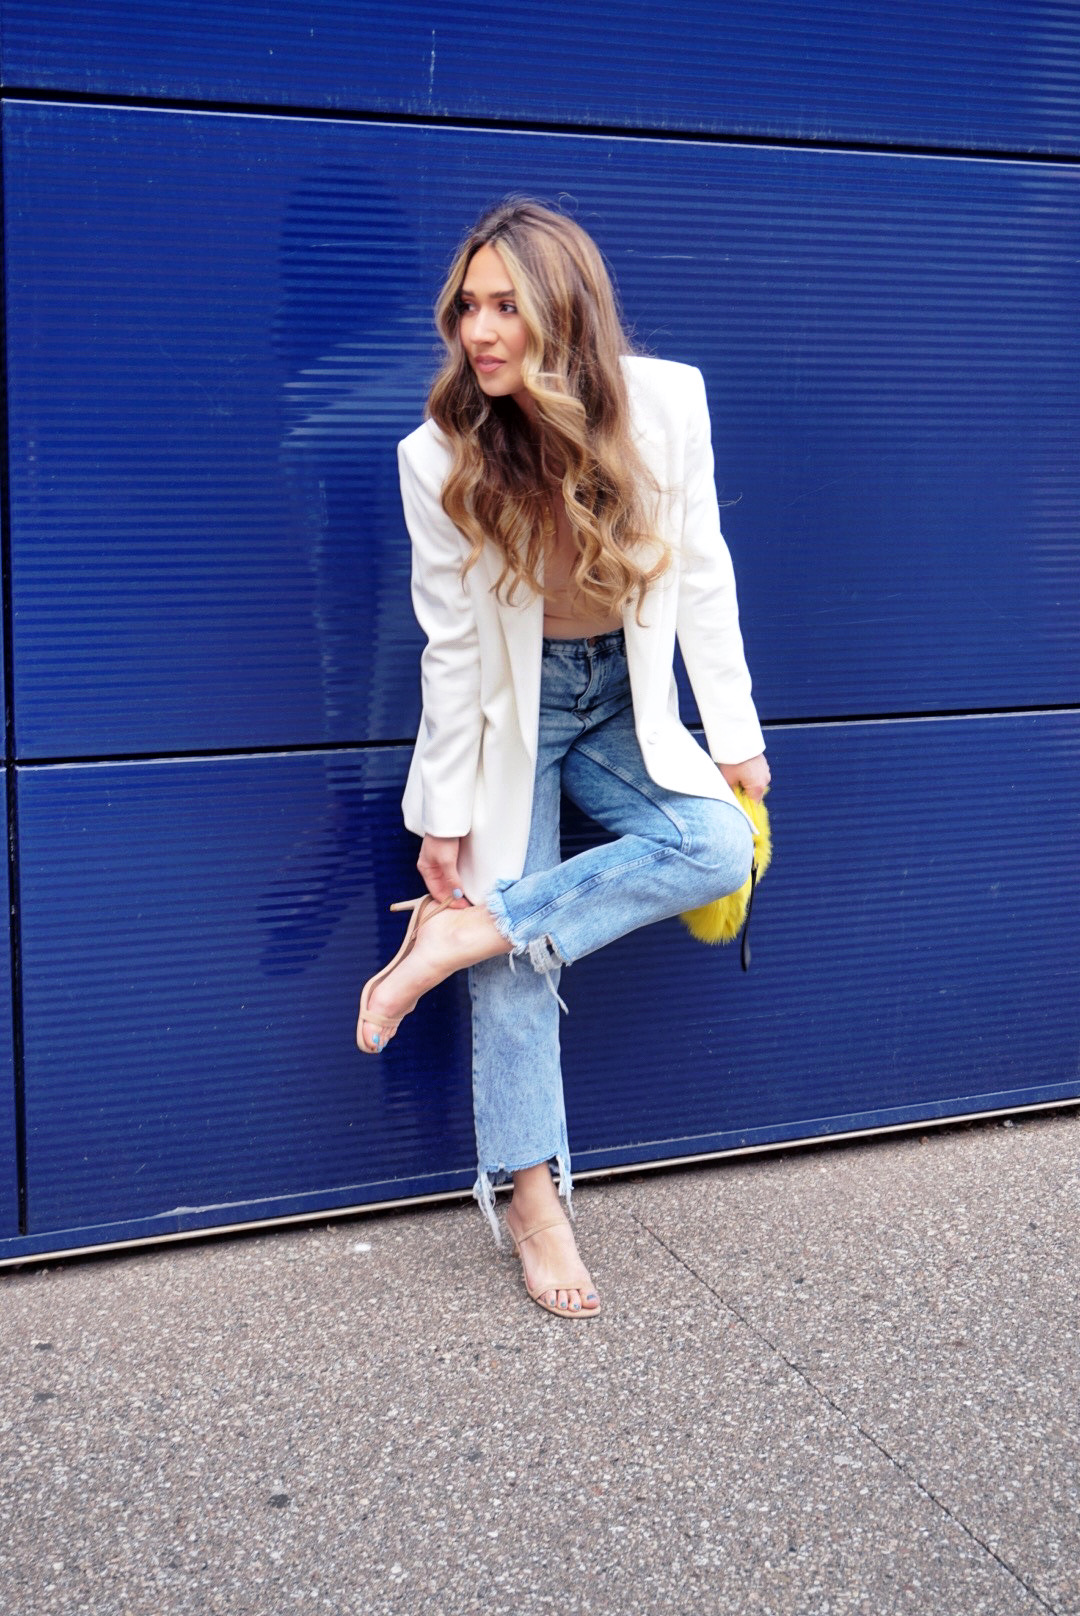 white-blazer-jean-shorts-light-wash-jeans-outfit-2-ways-to-style-cute-outfit-inspo